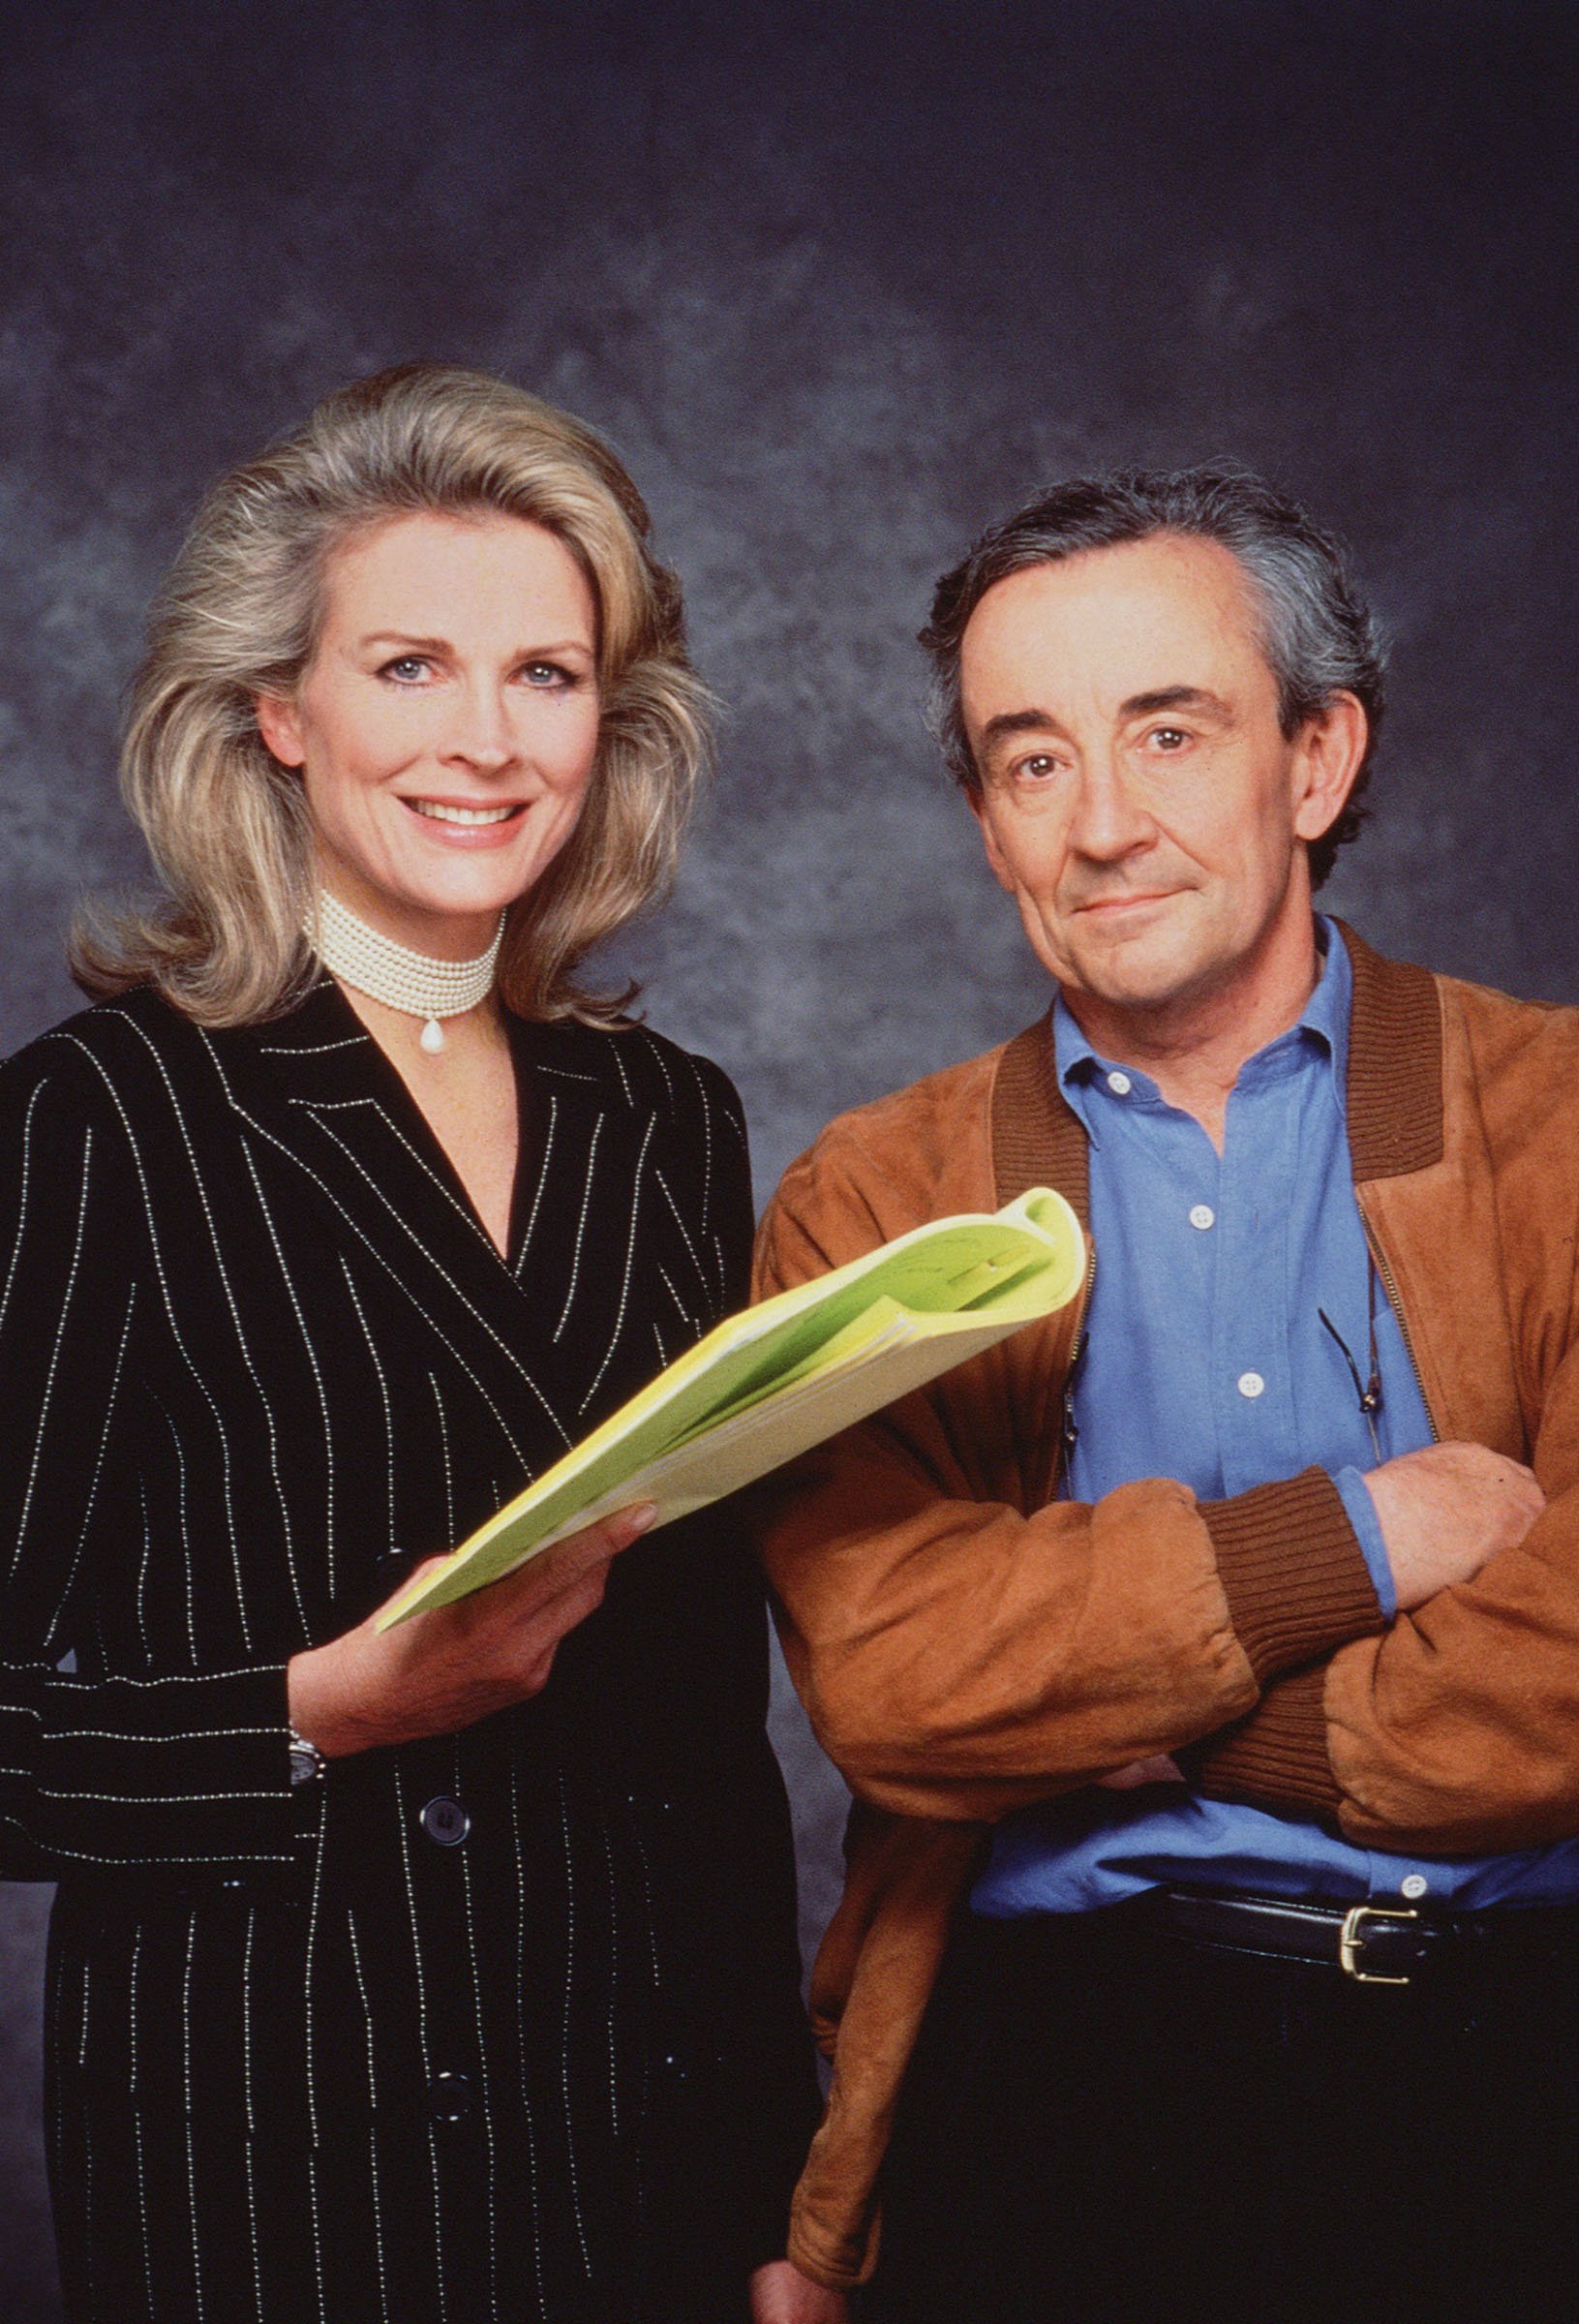 Candice Bergen and guest star Louis Malle star on "Murphy Brown" the CBS television situation comedy program January 1, 1994. Los Angeles CA | Source: Getty Images